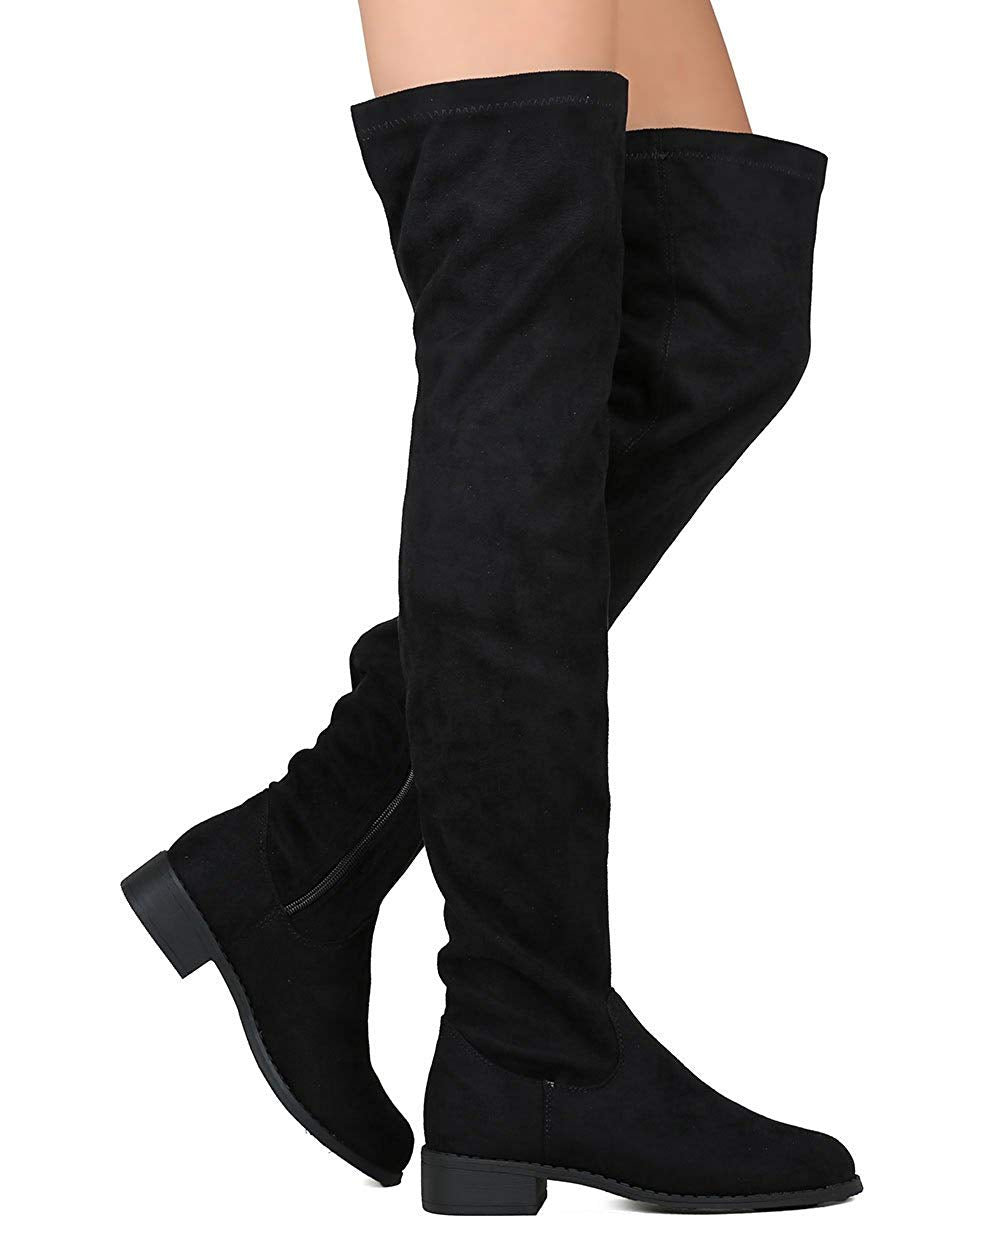 Olympia-20 - Thigh High Riding Low Heeled Fashion Boots – ShoeFad